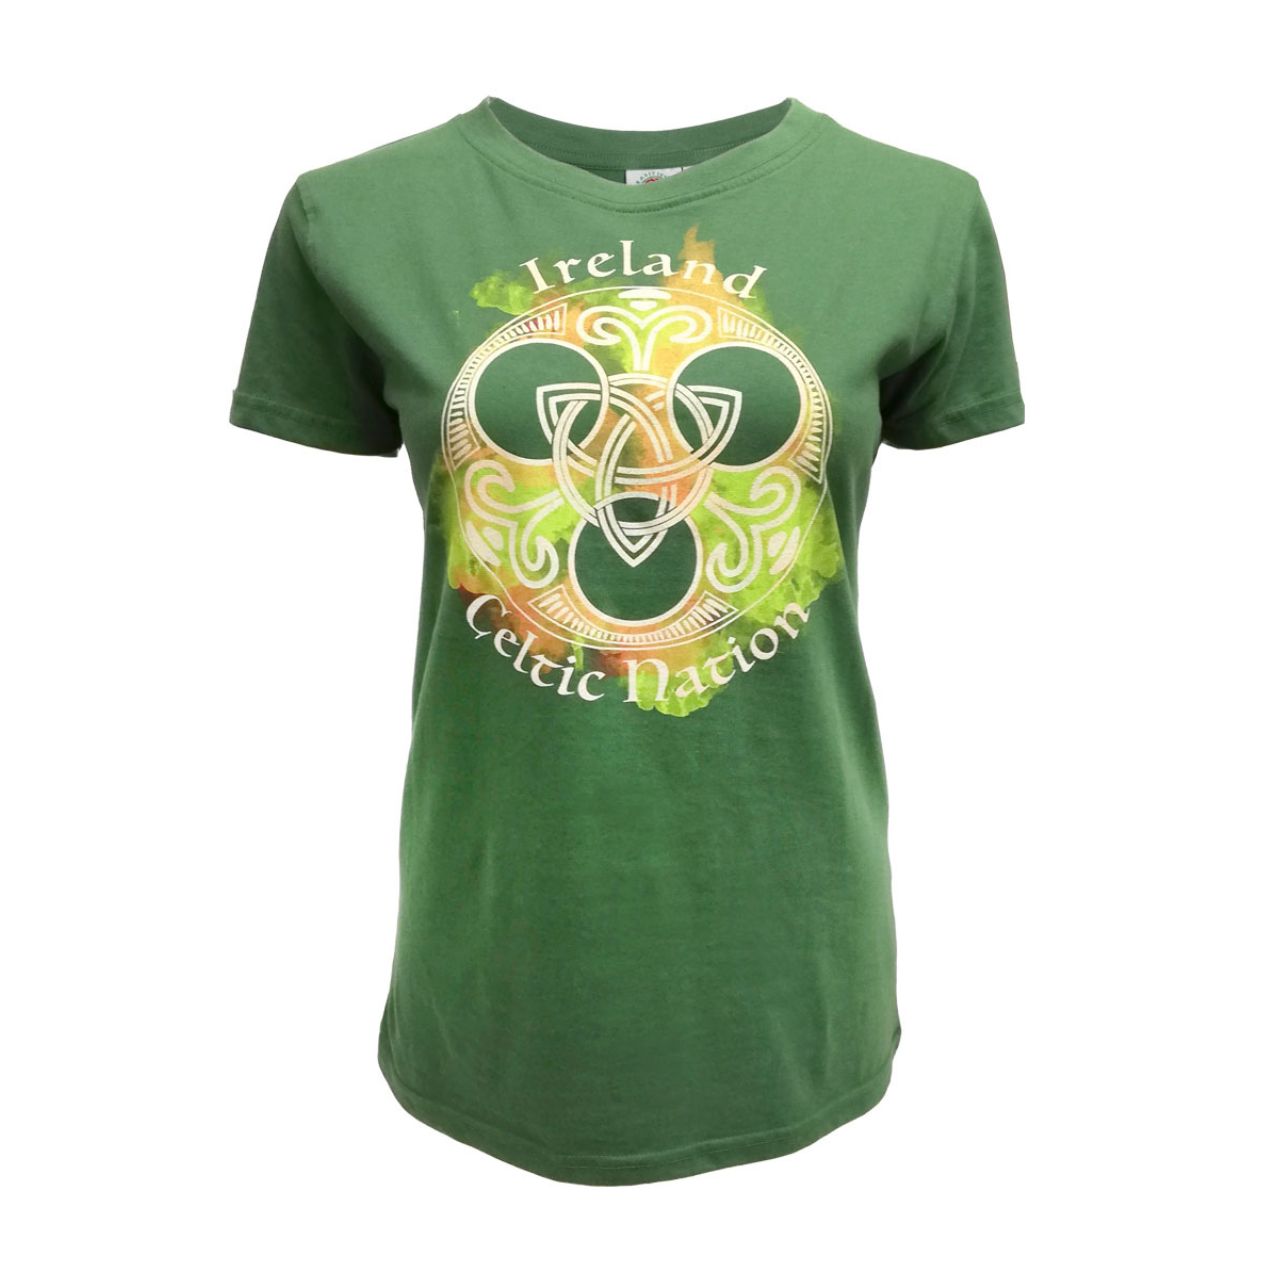 Sage Ireland Celtic Nation Round Crest Ladies T-Shirt  Celtic Design – A bold and colourful Celtic pattern adorns the front of this tee with vibrancy and texture